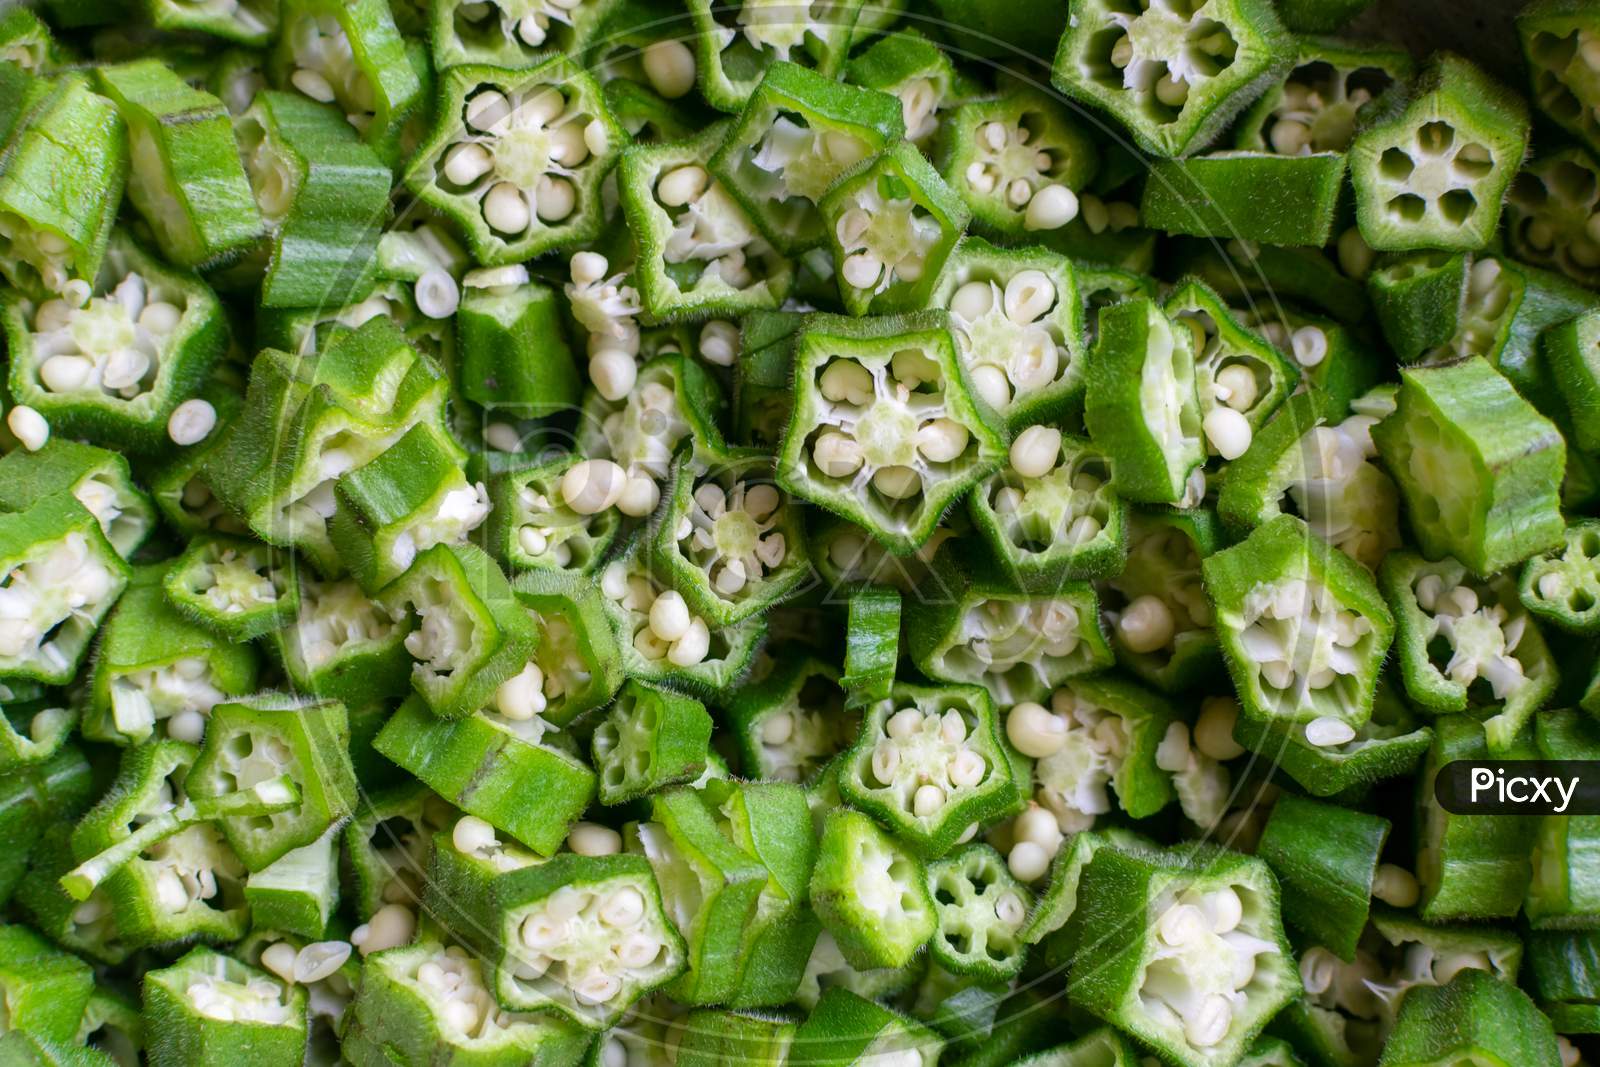 Background Of Freshly Chopped Green Vegetable Okra Or Okro Also Known As Ladies Fingers Or Orhro In Many Countries.